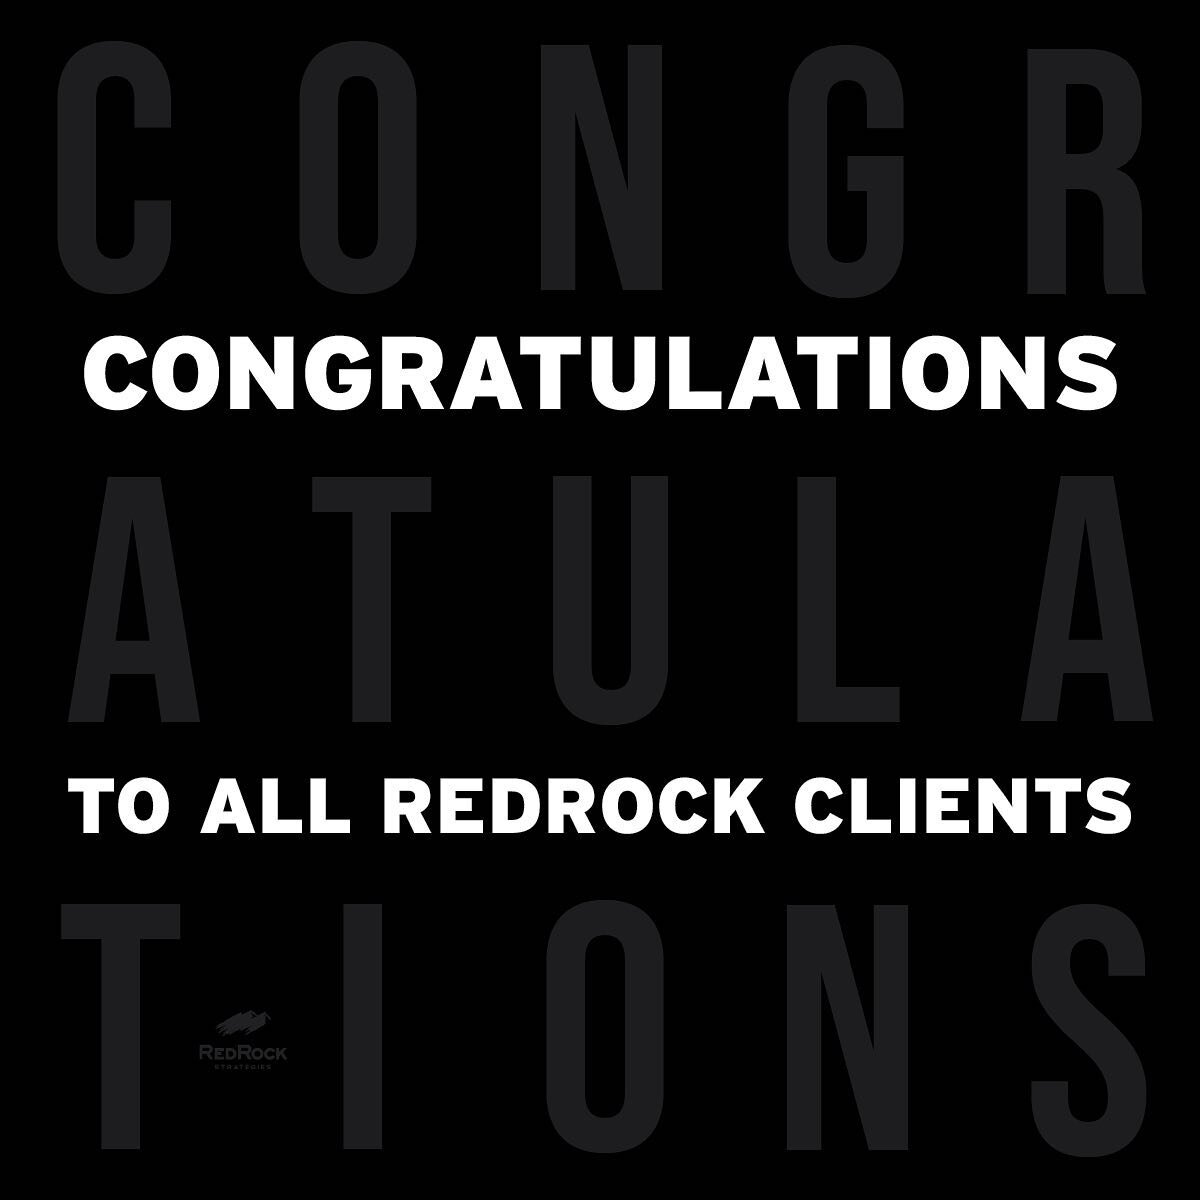 Congratulations to ALL RedRock clients on some outstanding victories and tough fought races. We are proud to see all the hard work pay off.